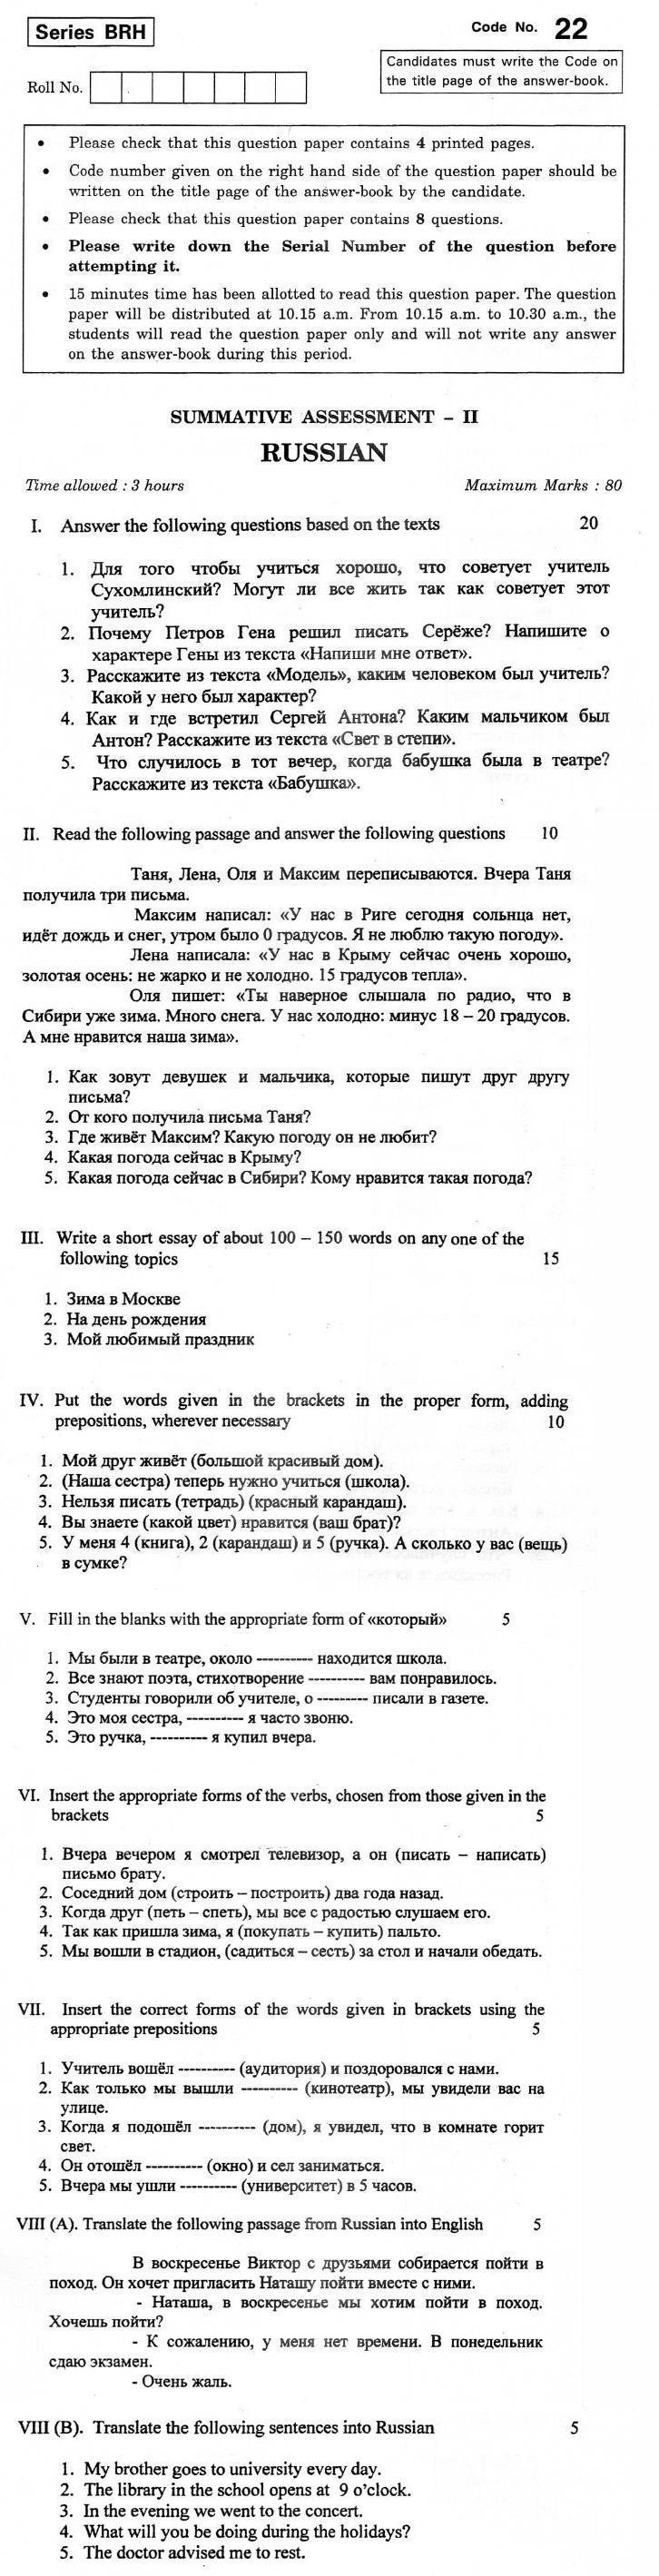 CBSE Class X Previous Year Question Papers 2012 Russian